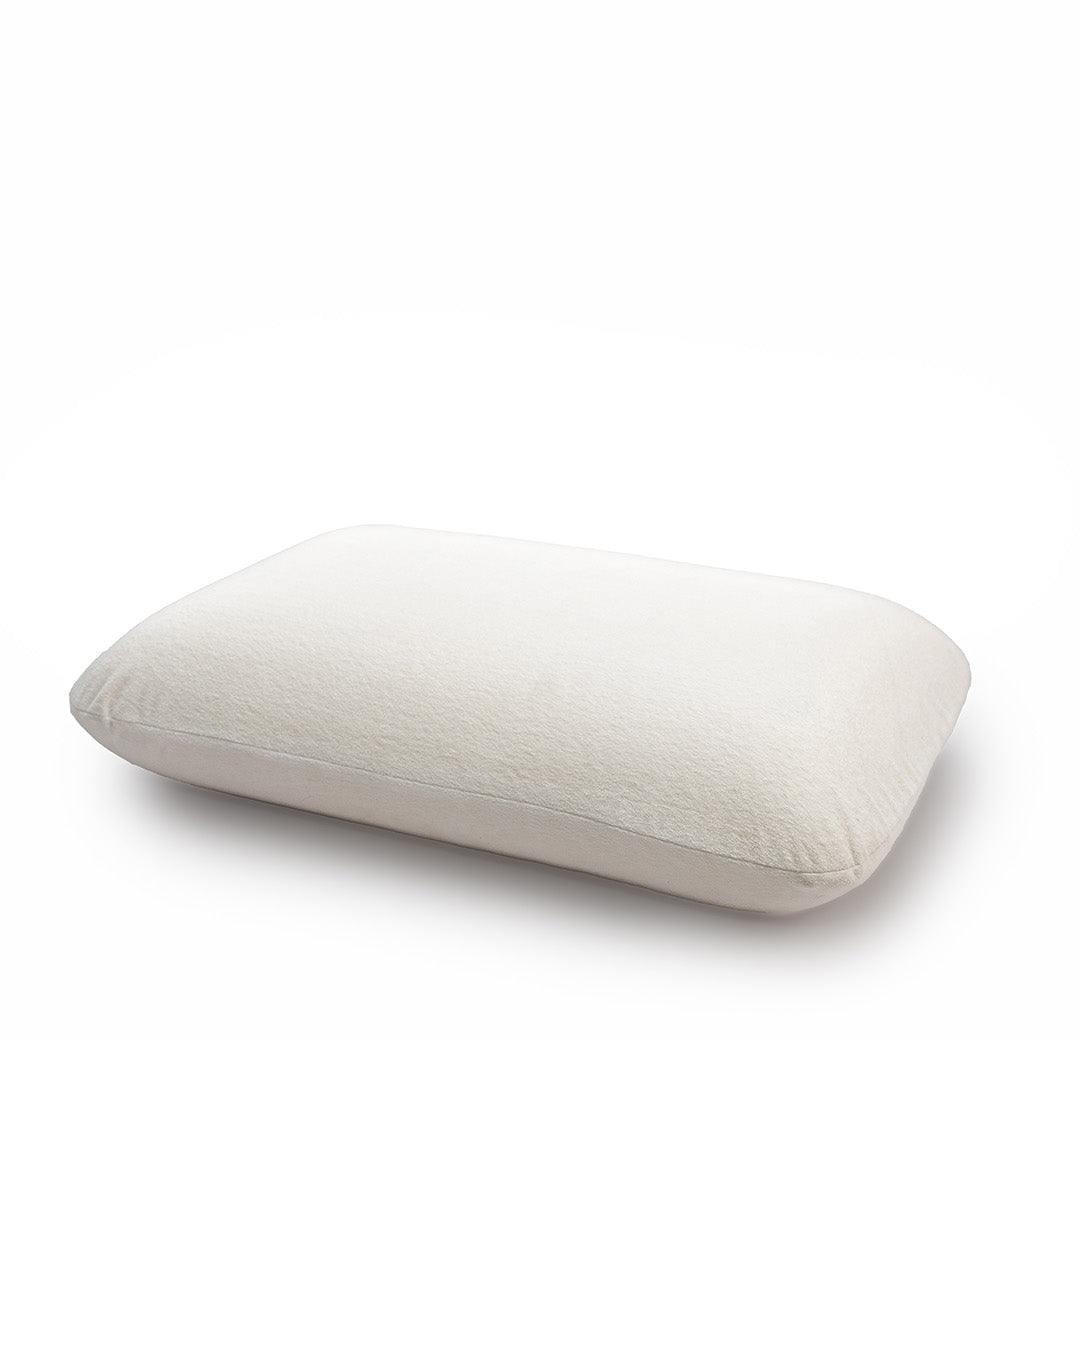 Classic Latex Pillow with holes